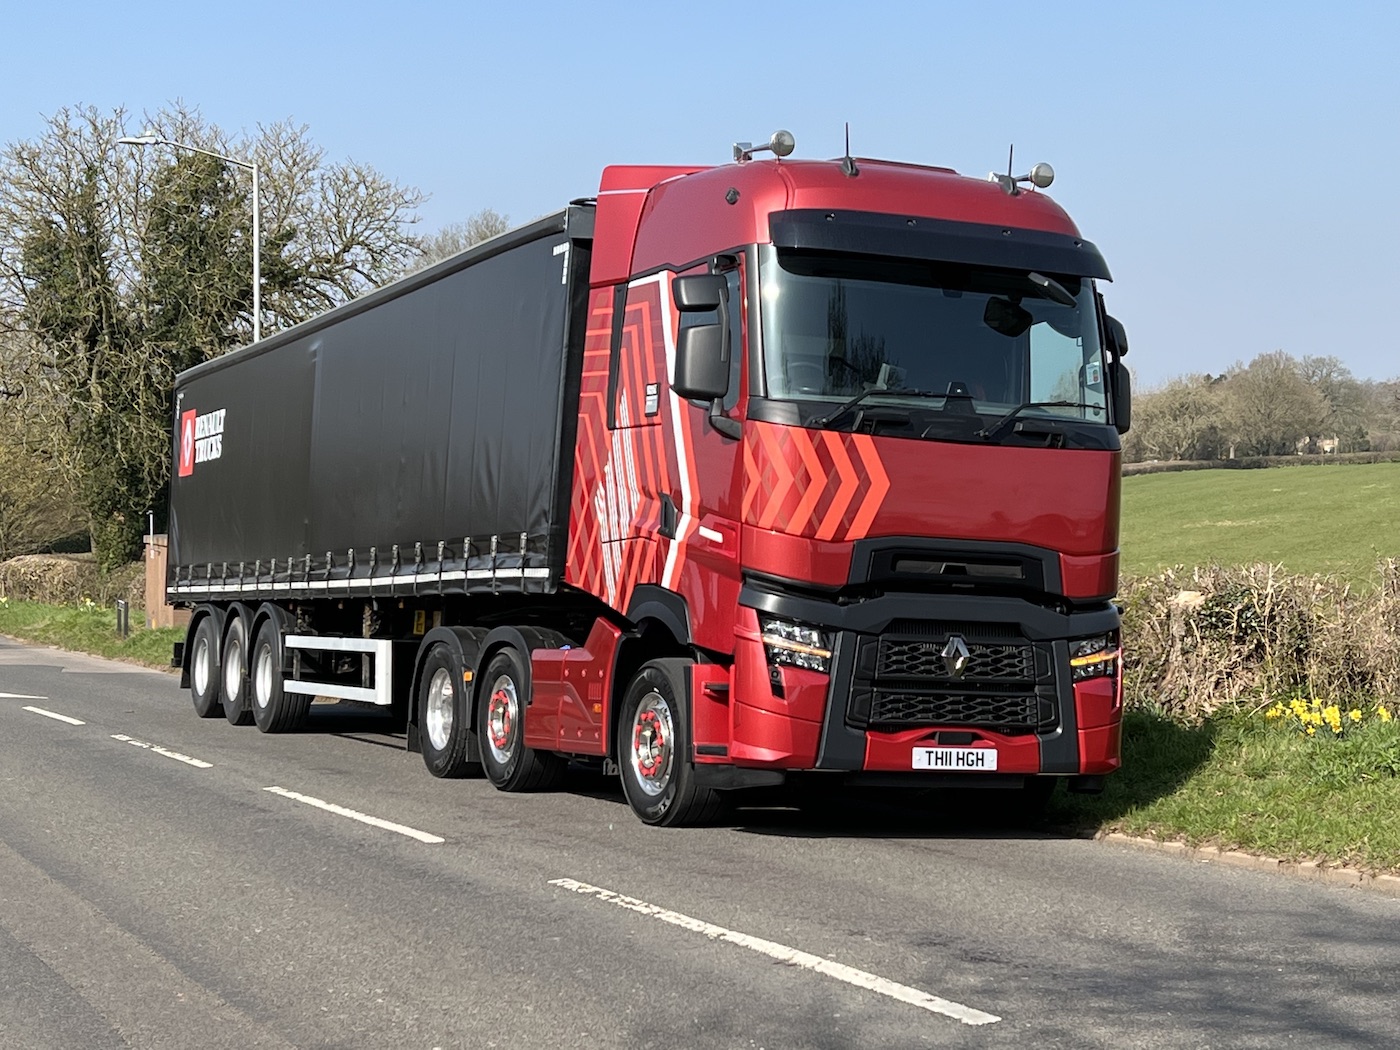 New Maxispace cab for the Renault Trucks T High - Truck reviews